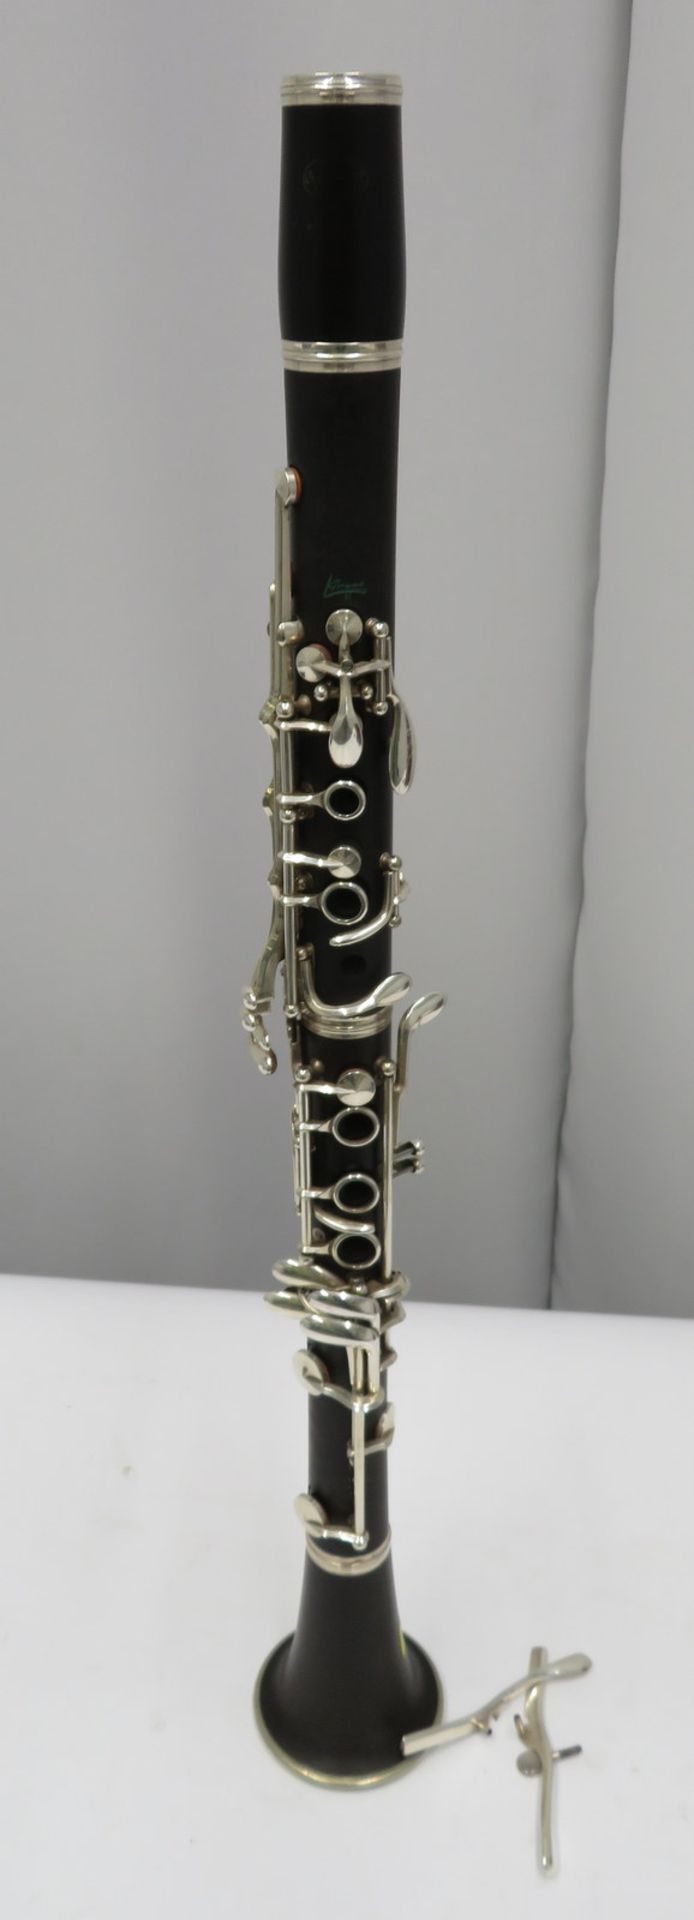 Buffet Crampon L Green clarinet with case. Serial number: 477678. - Image 2 of 19